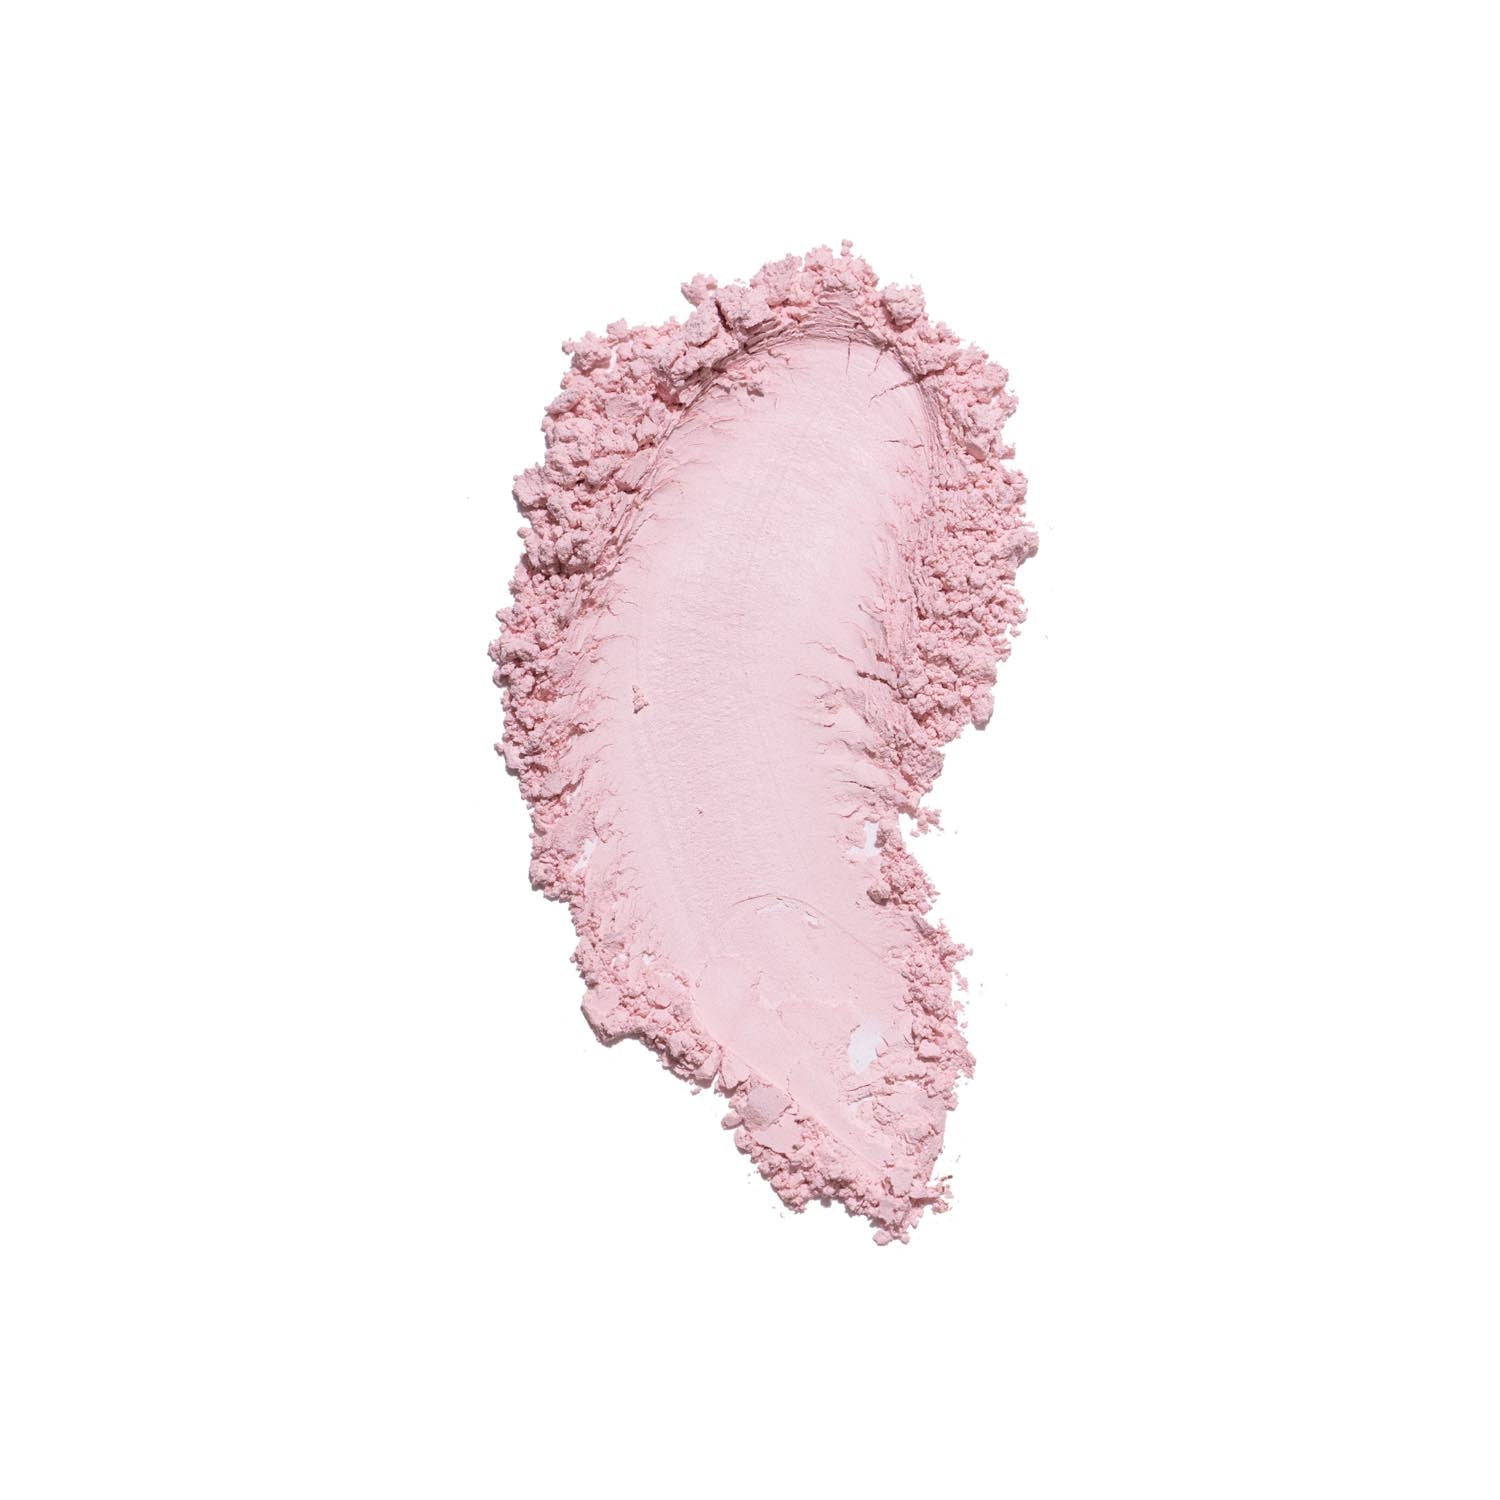 Bperfect BPerfect x Katie Daley - Perfect Powder 3 Shaws Department Stores